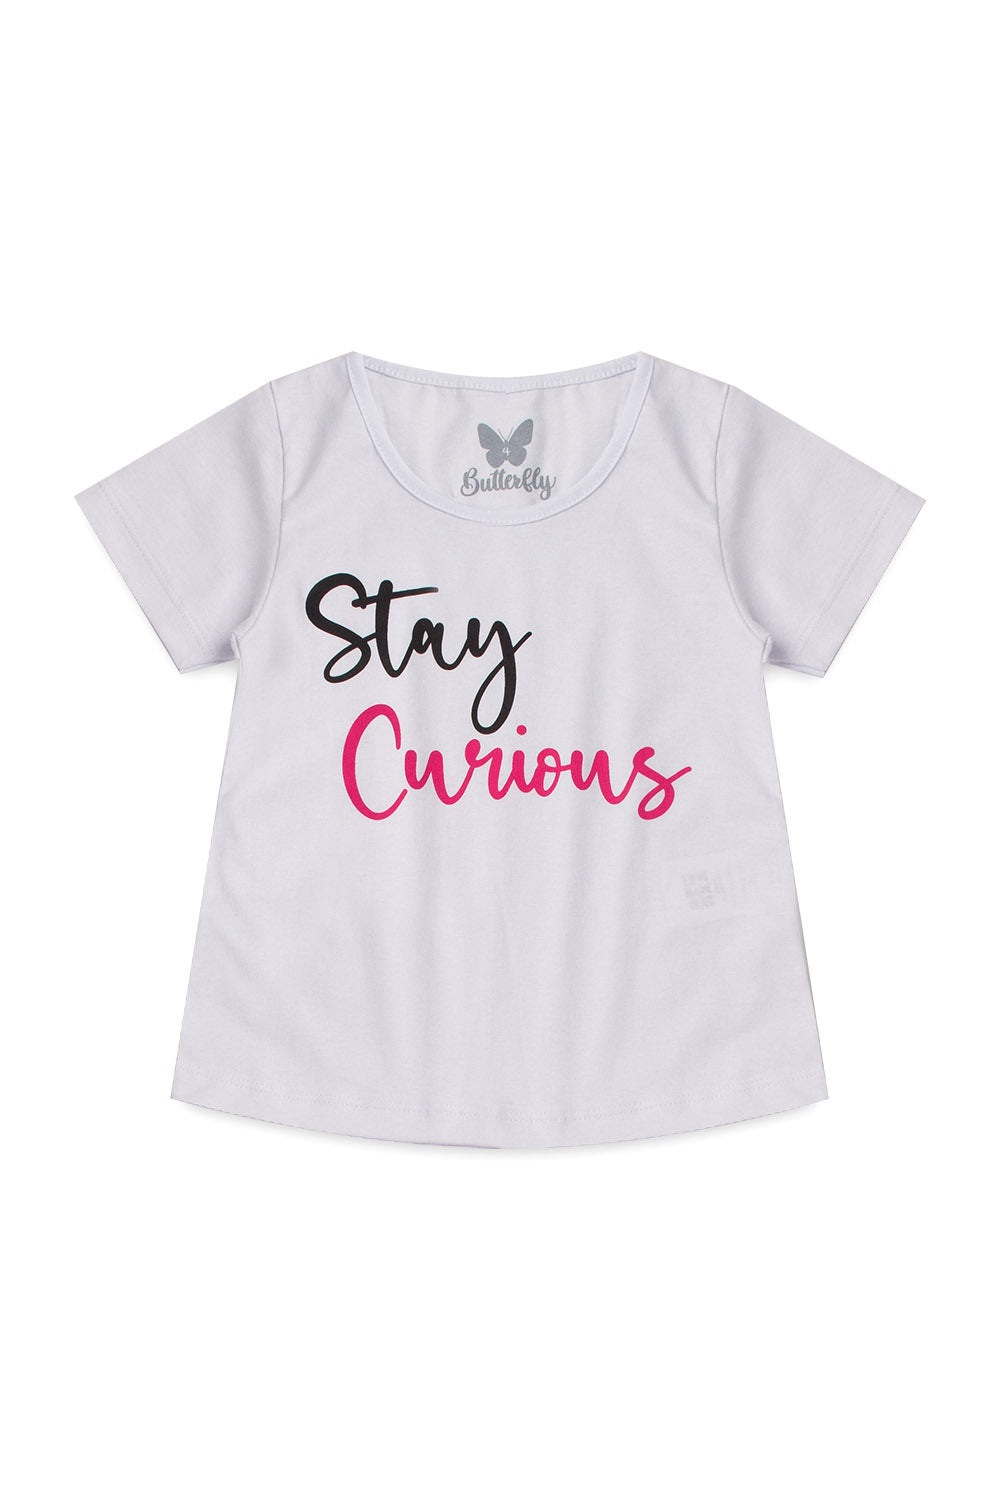 STAY CURIOUS Girl T-Shirts + Skirt Shorts Set